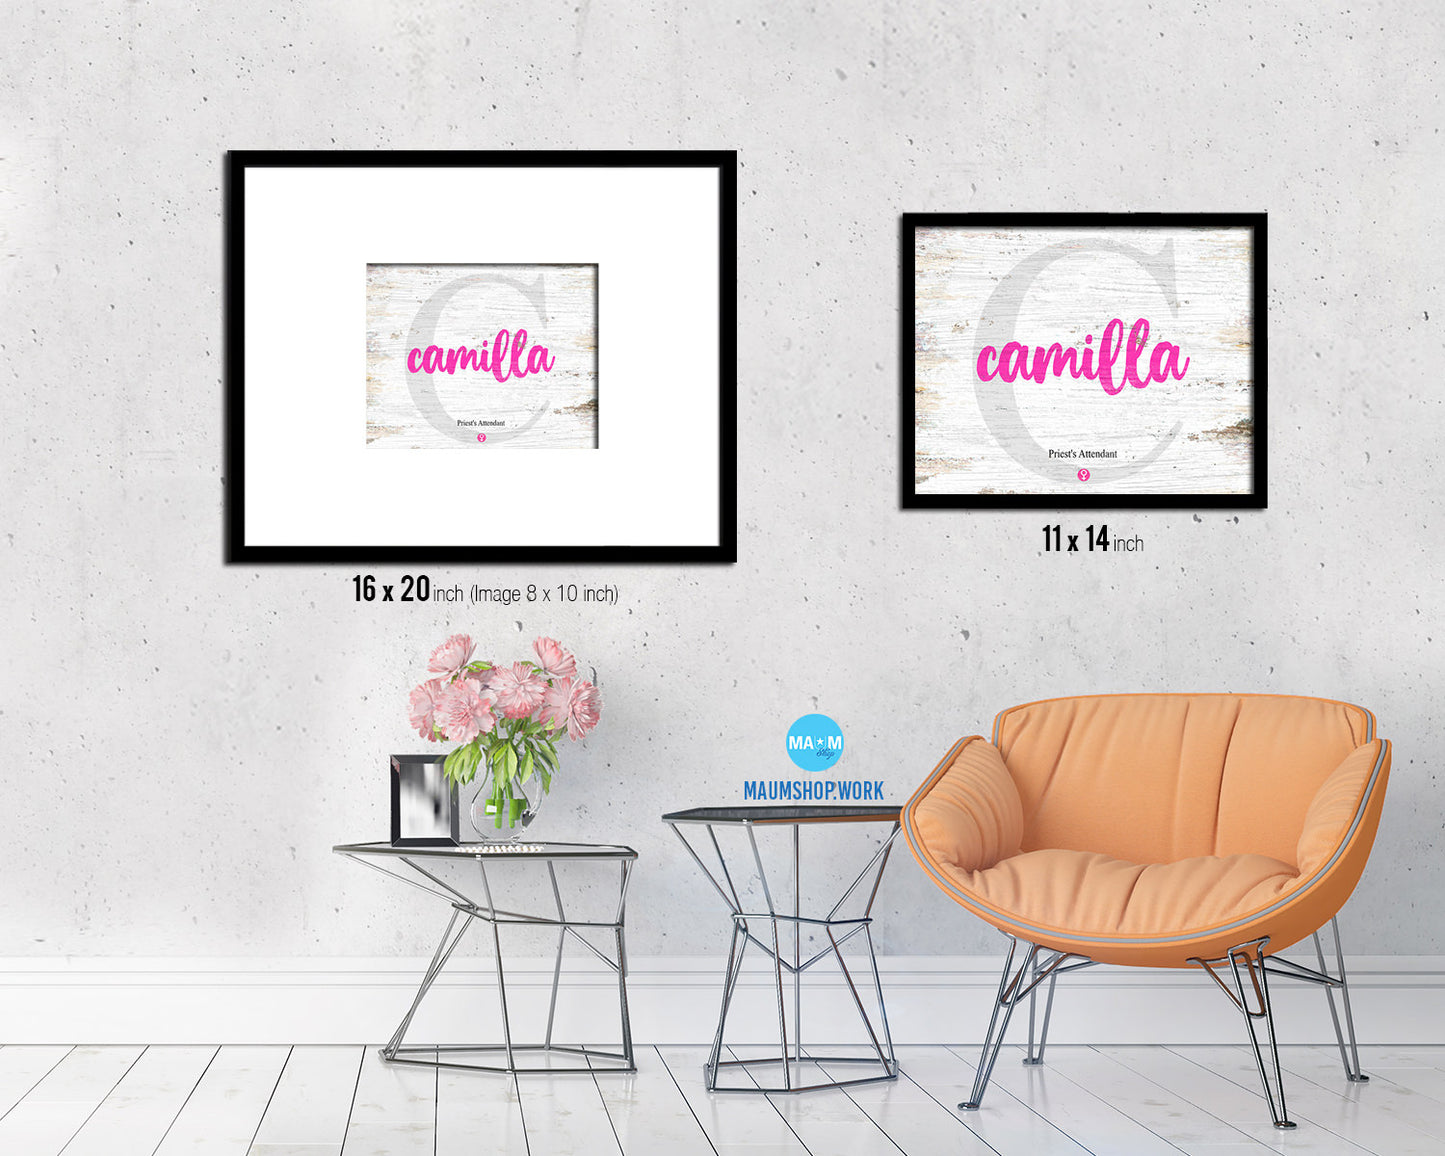 Camilla Personalized Biblical Name Plate Art Framed Print Kids Baby Room Wall Decor Gifts